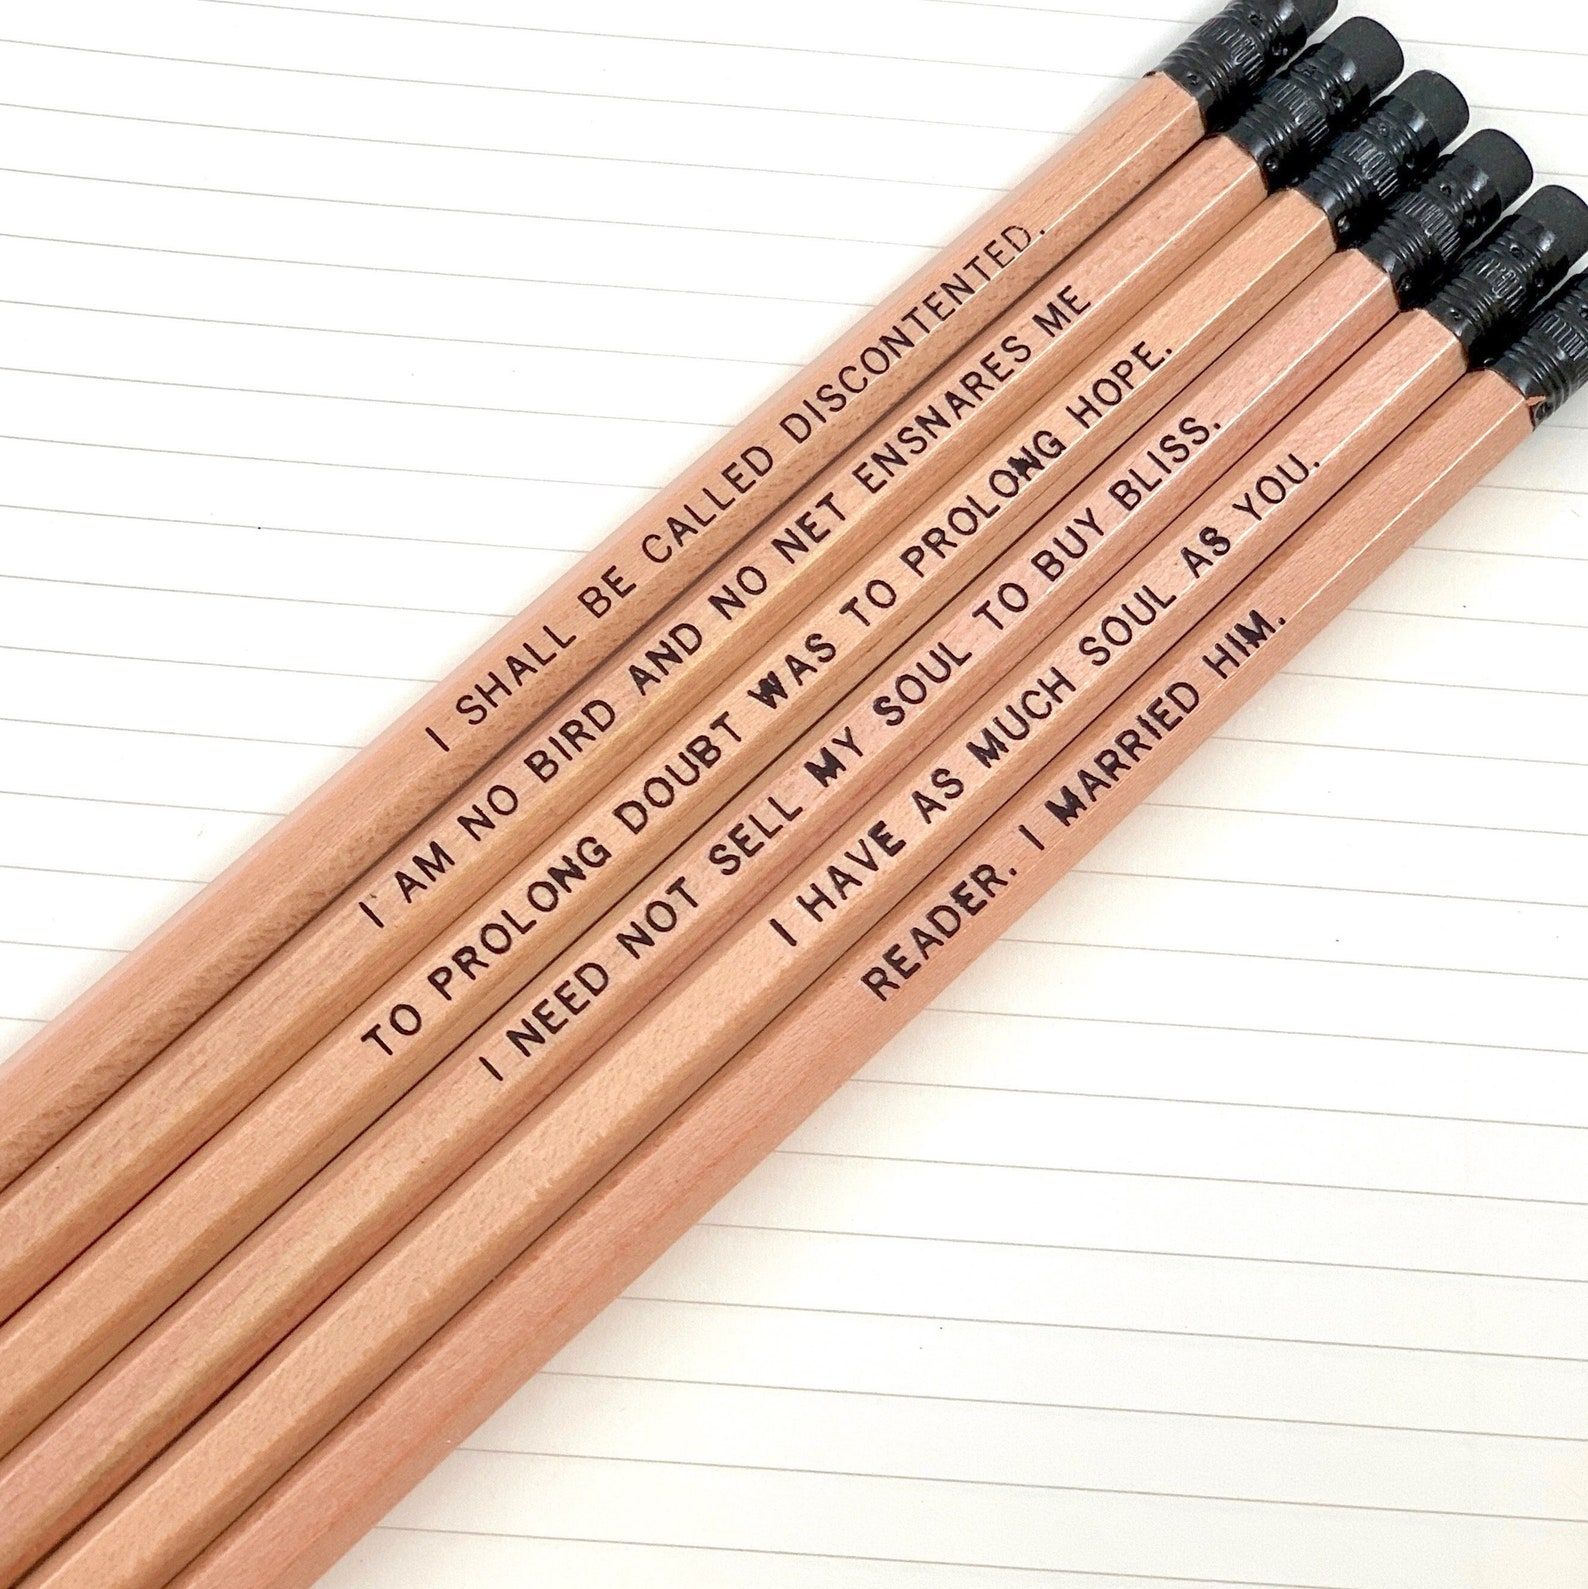 natural wood colored pencils, each printed with a quote from Jane Eyre like "Reader, I Married Him."